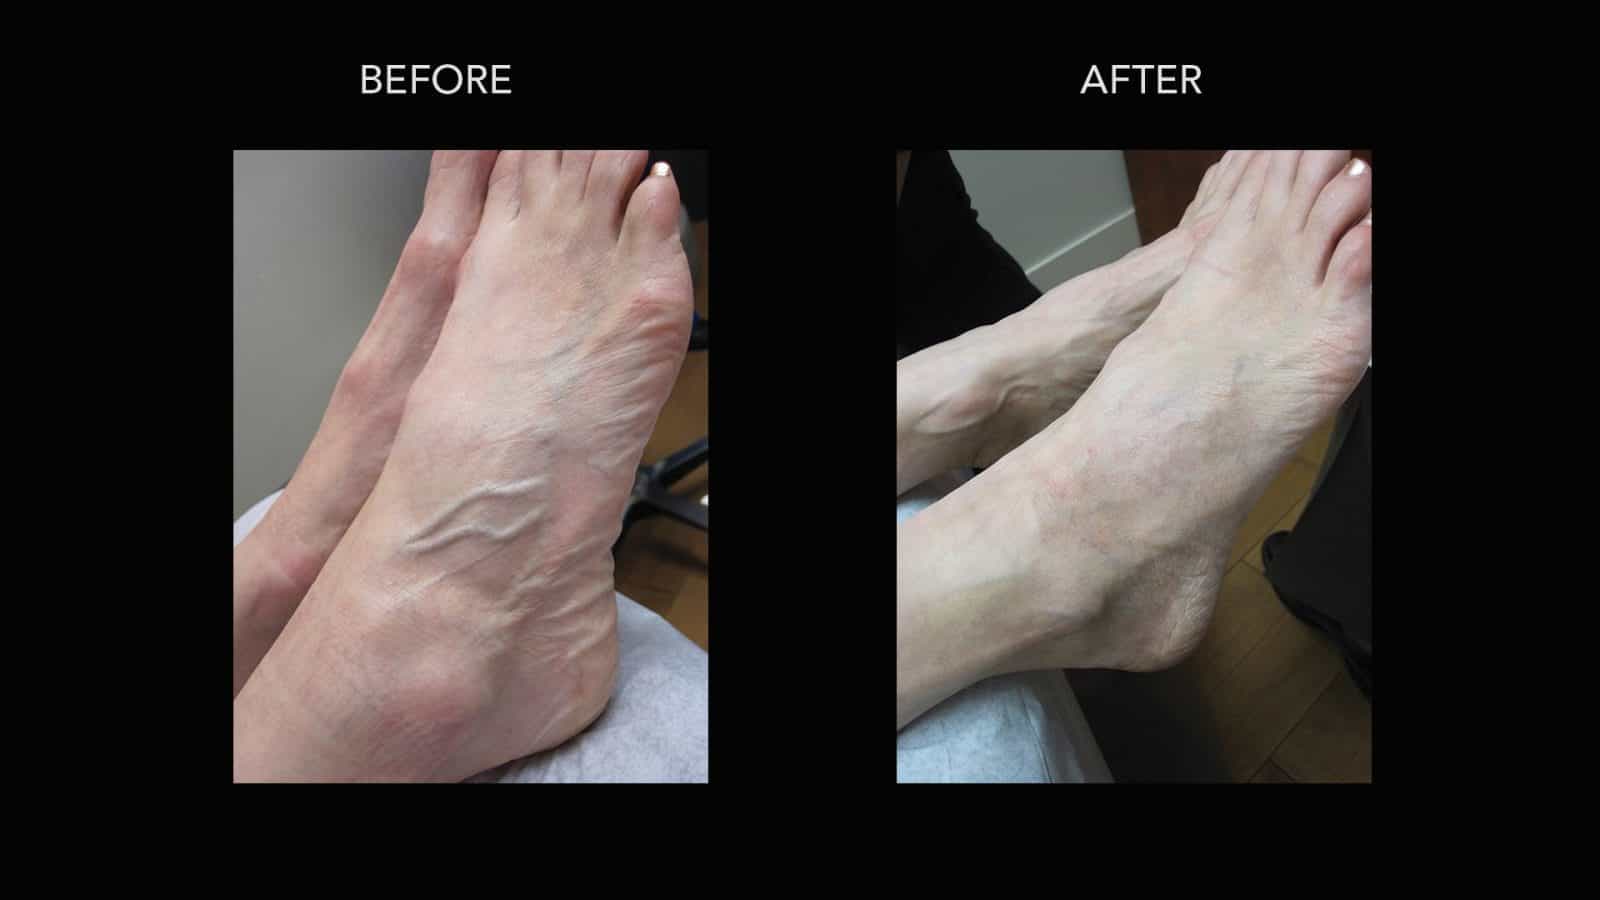 Vein Treatments Before and After Photos | DermMedica